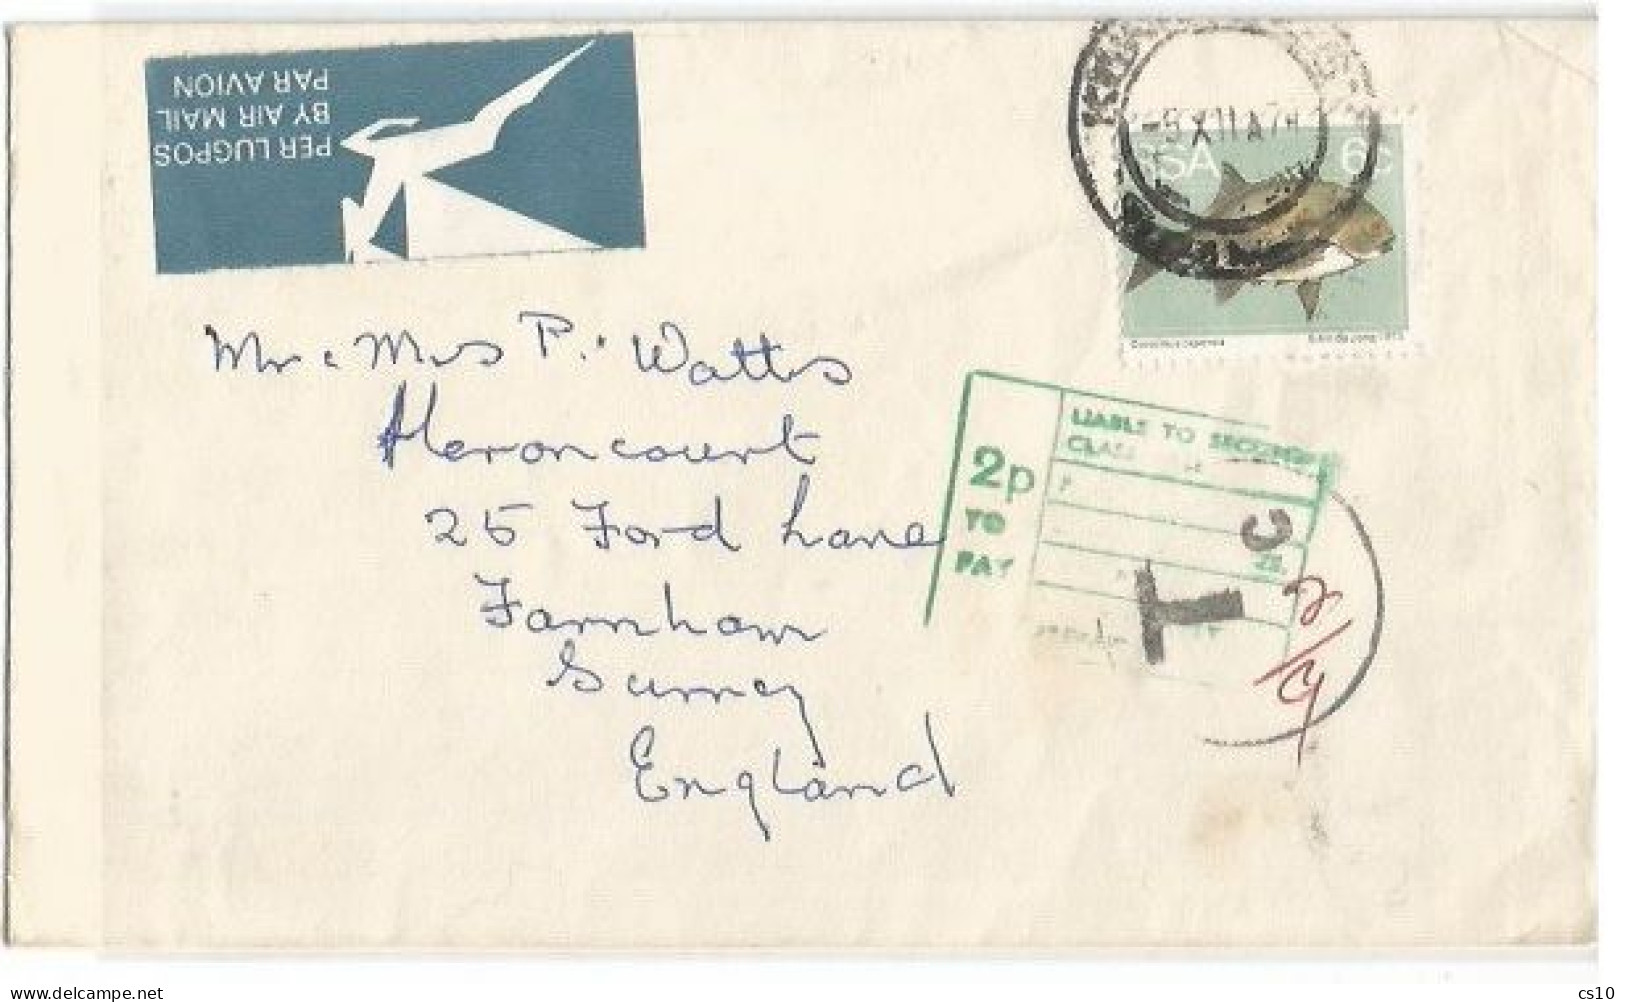 South Africa AirmailCV Kimberley 5dec1974 With Regular C6 Underfranked AND Taxed 2/9 On PMK 2p In UK - Lettres & Documents